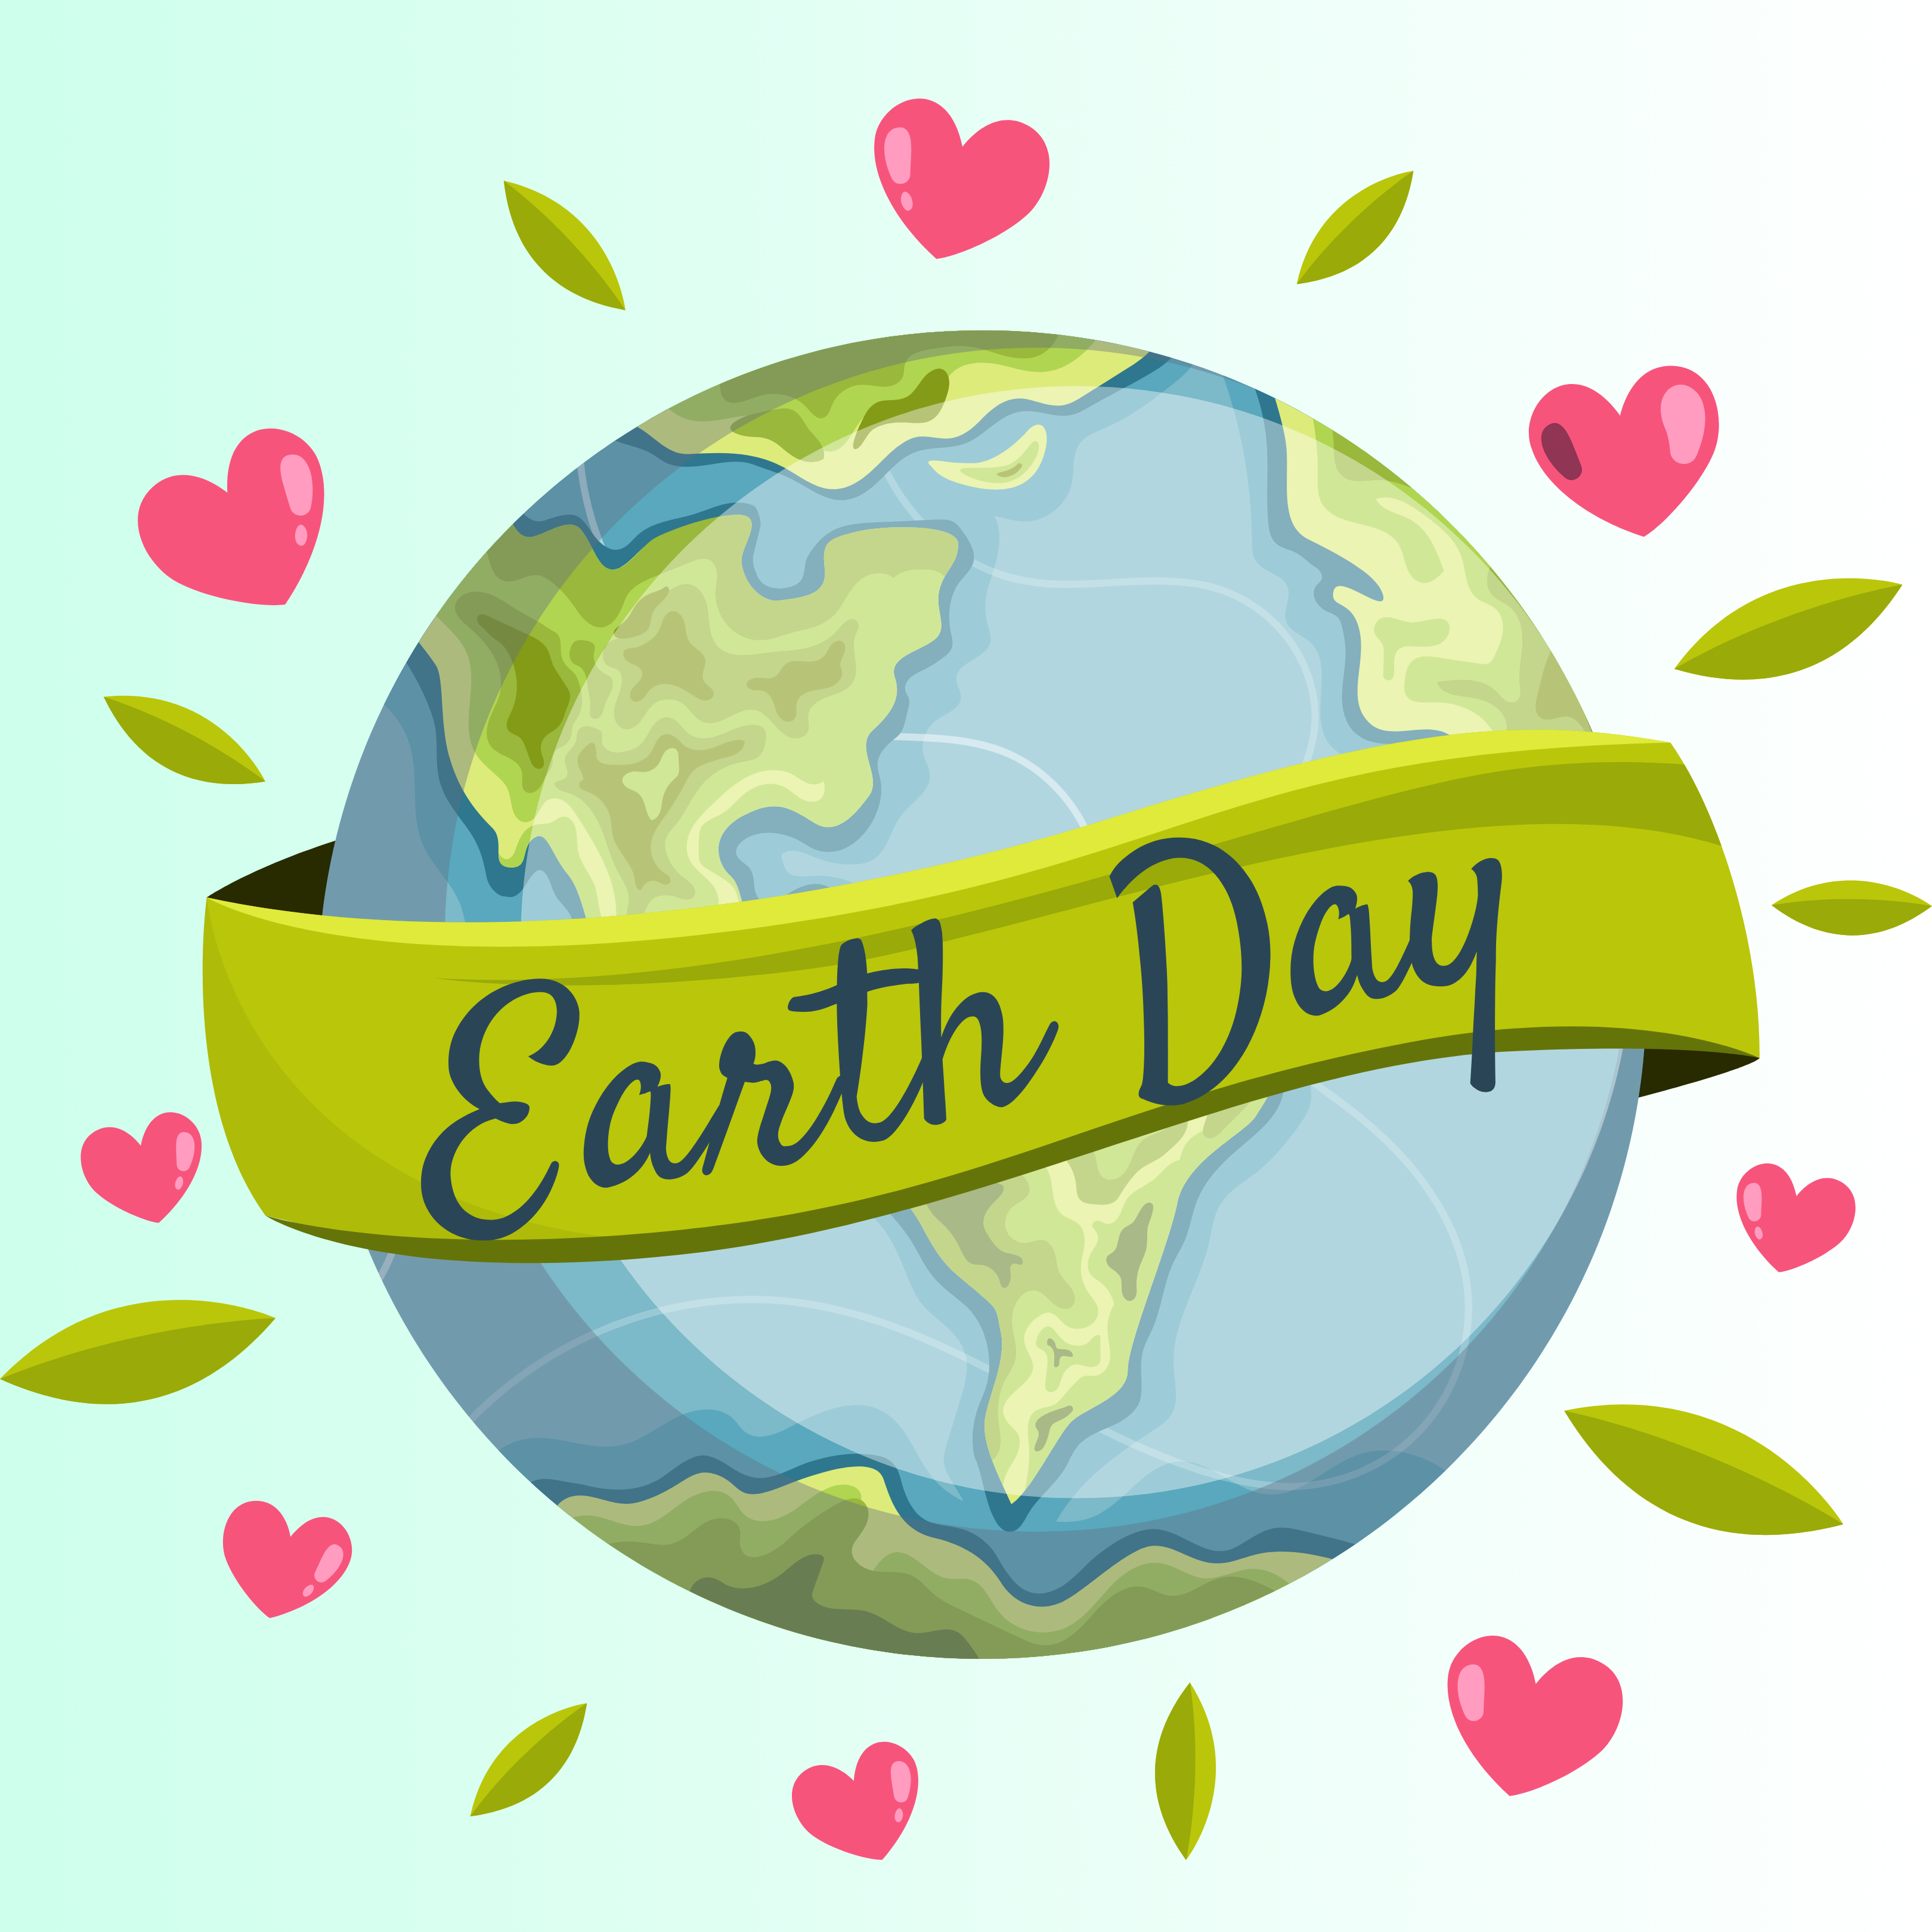 Earth Day graphic with hearts around a globe.